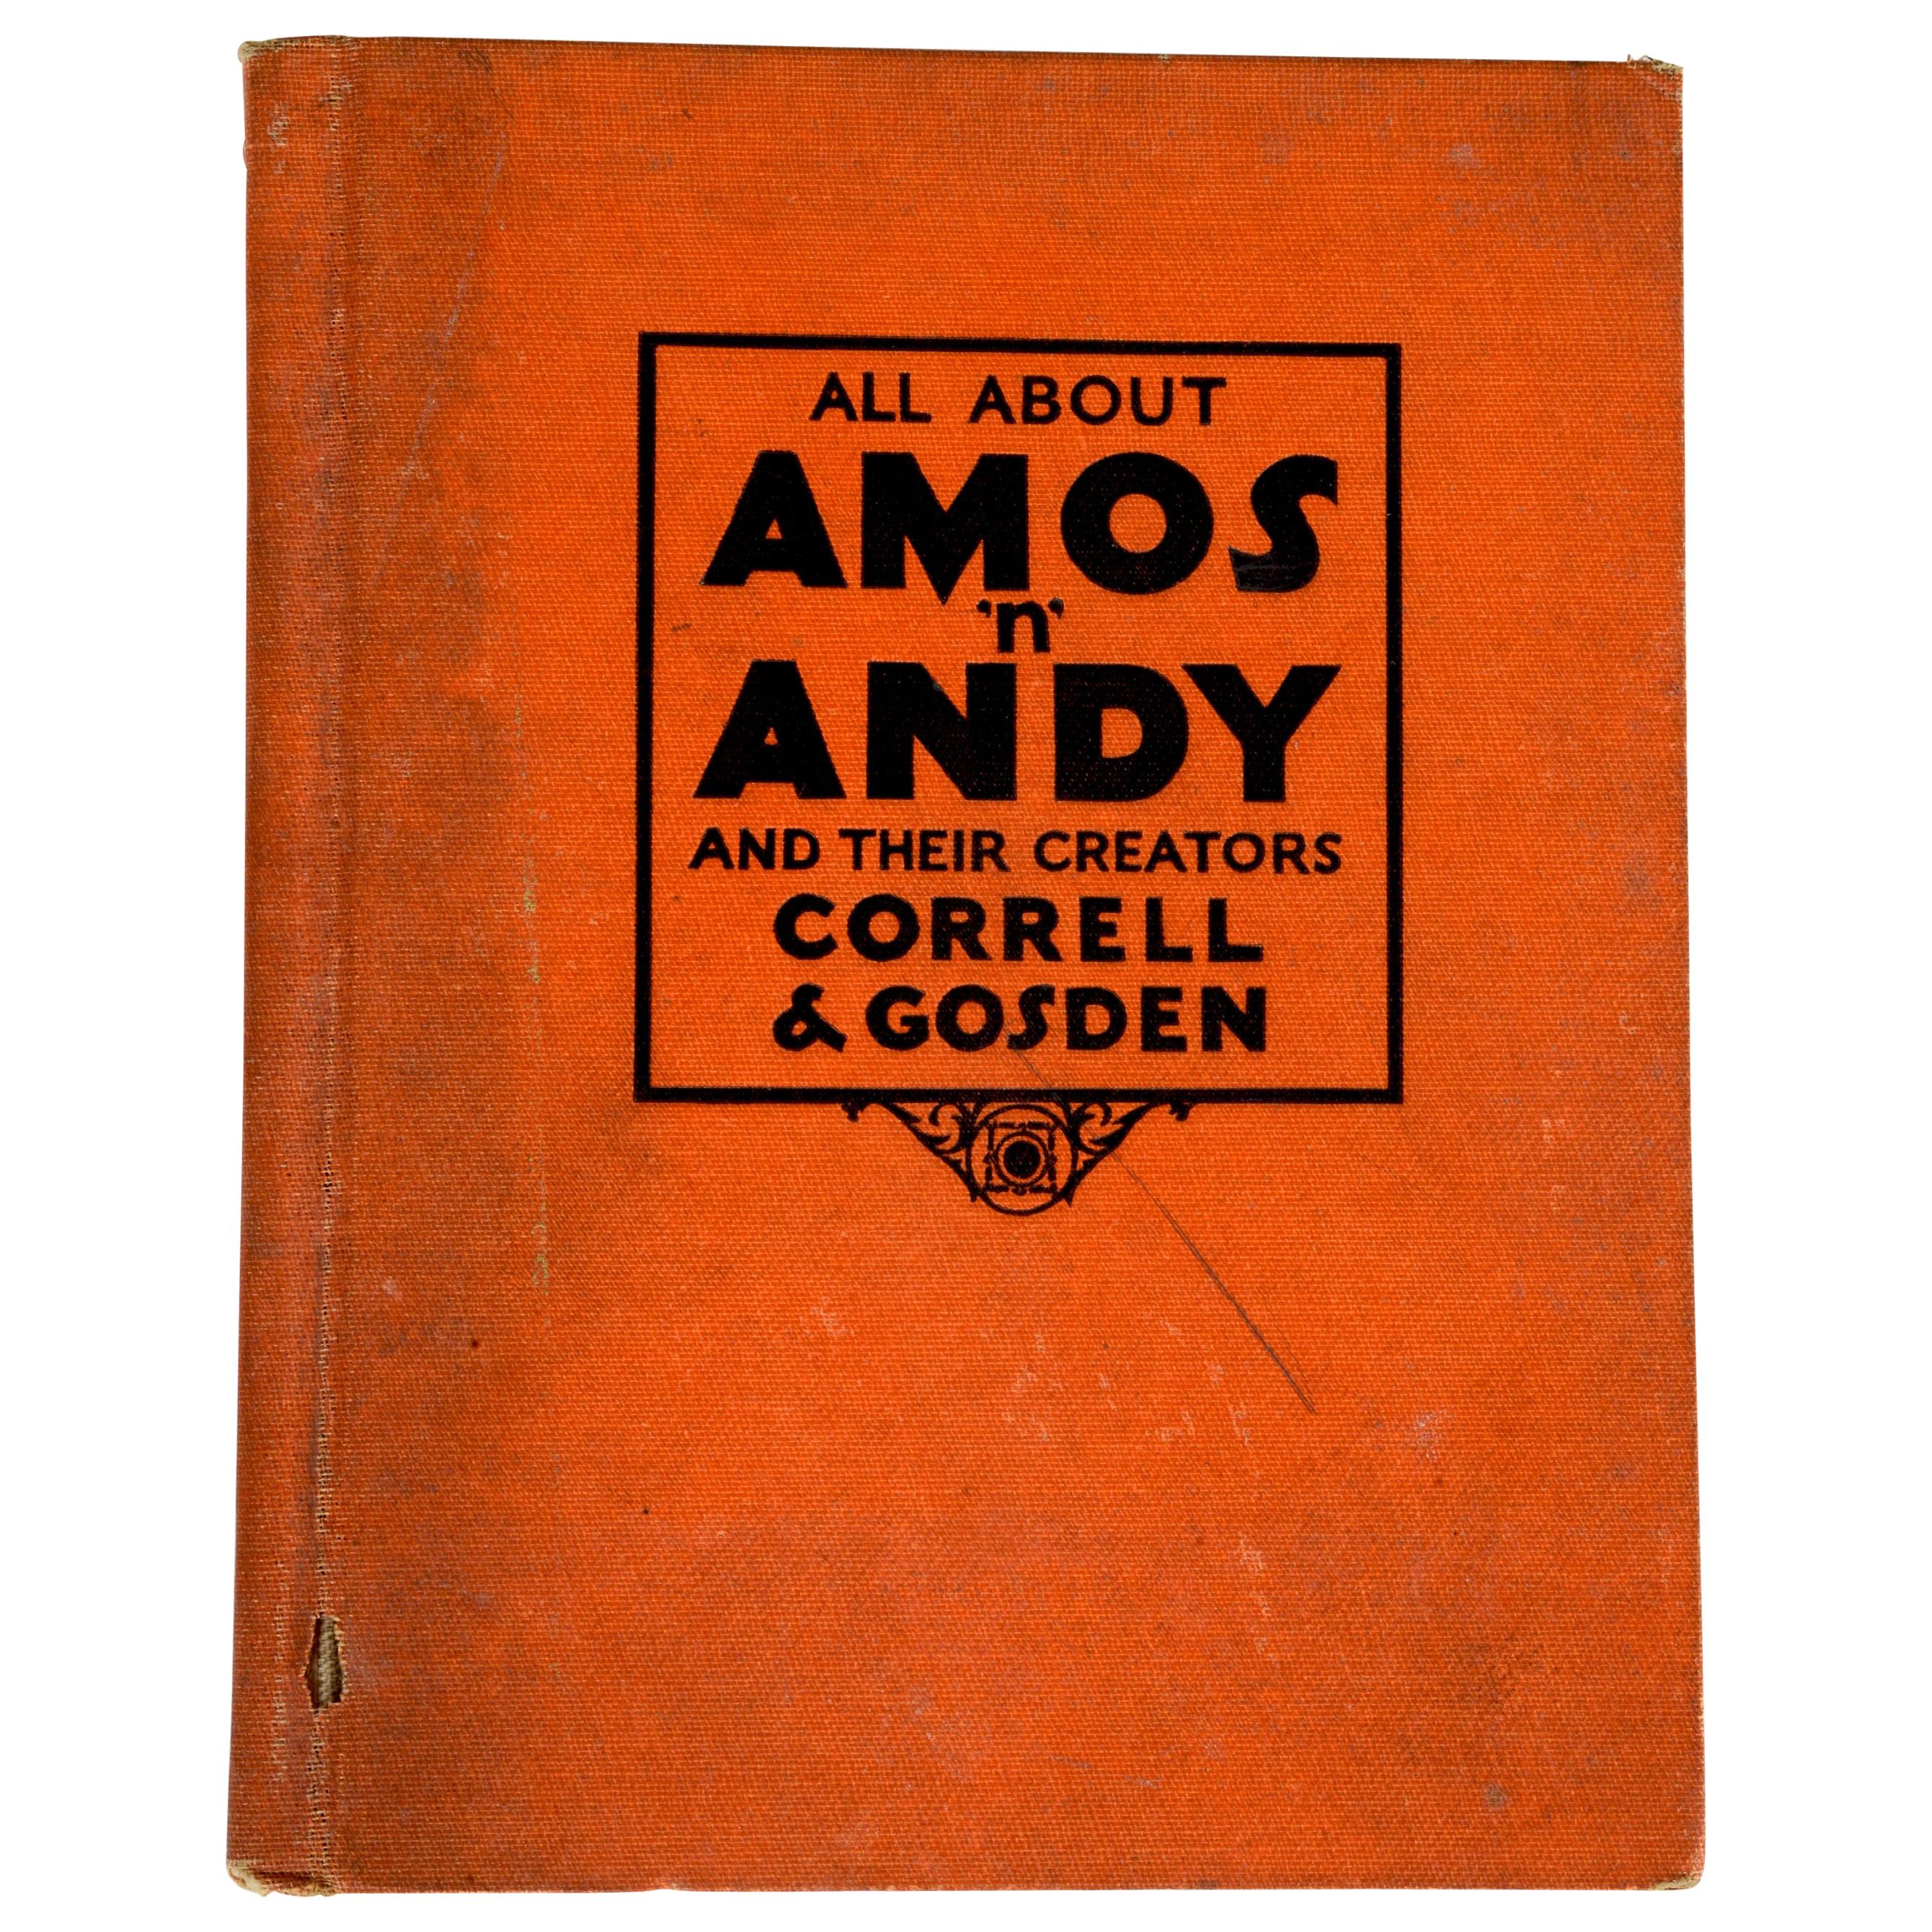 All About Amos 'n' Andy and Their Creators, by Correll & Gosden For Sale